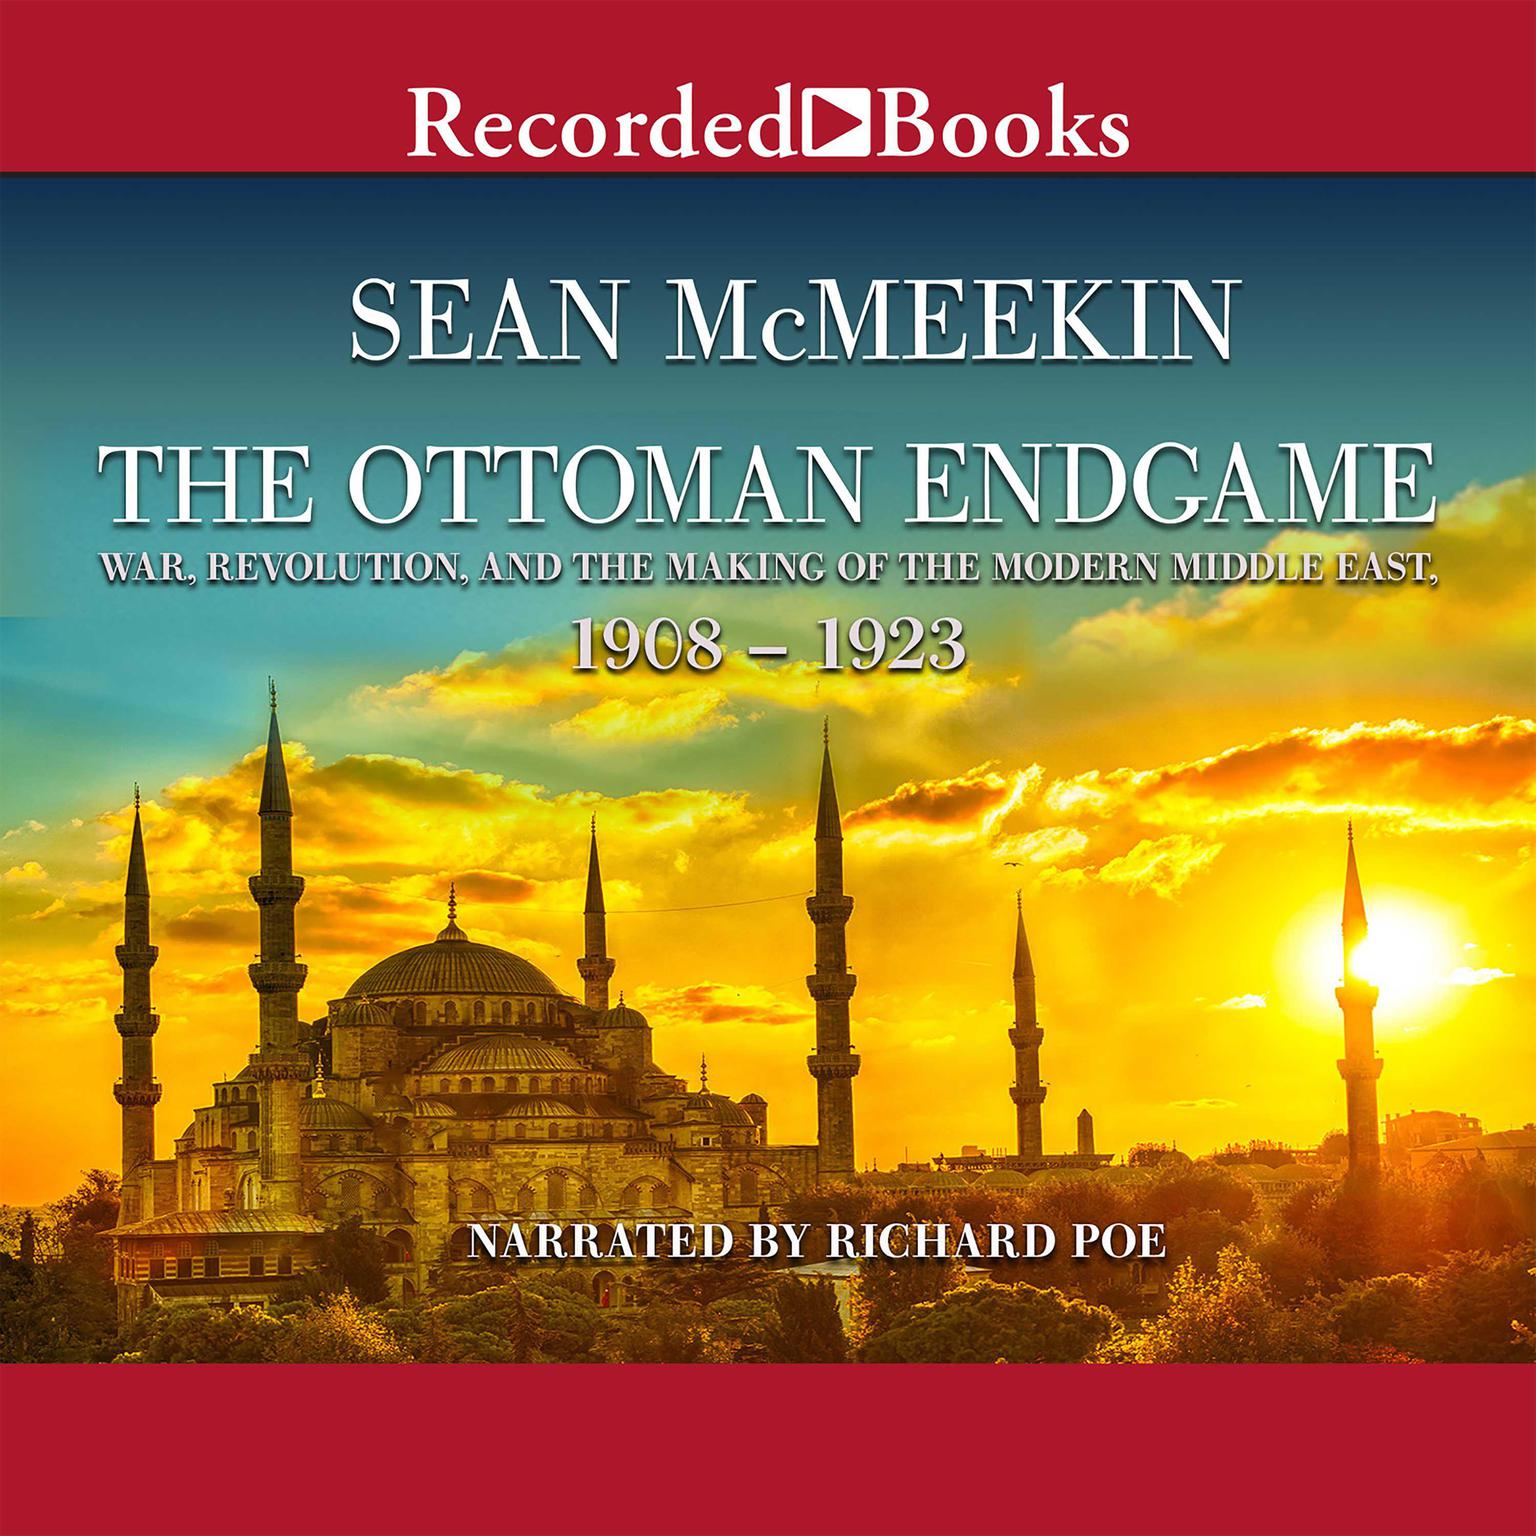 The Ottoman Endgame: War, Revolution, and the Making of the Modern Middle East, 1908-1923 Audiobook, by Sean McMeekin